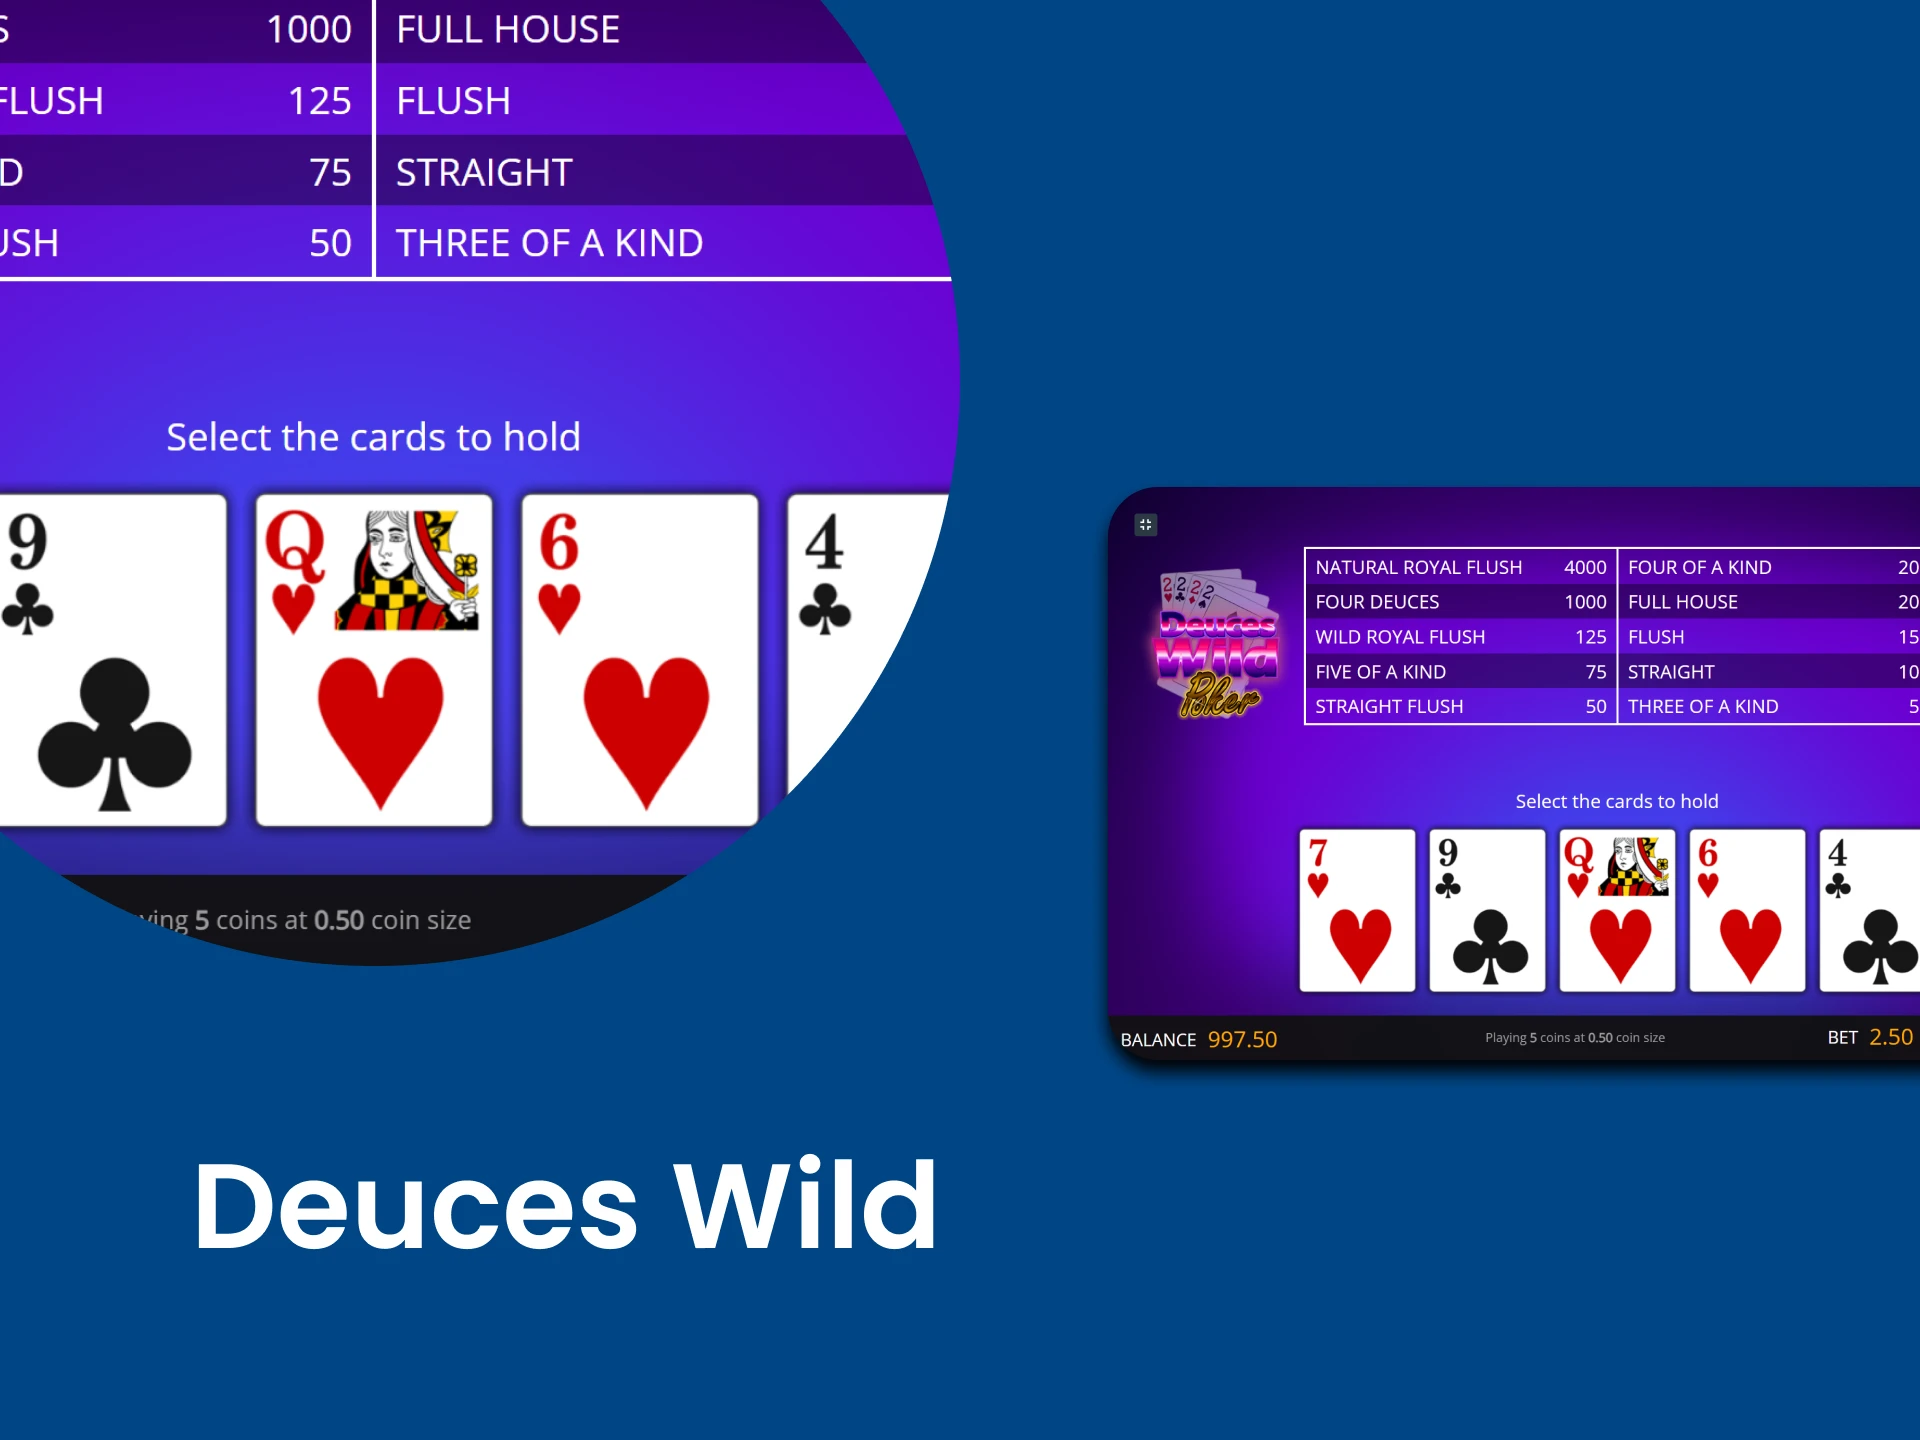 To play Video Poker, choose a game like Deuces Wild.